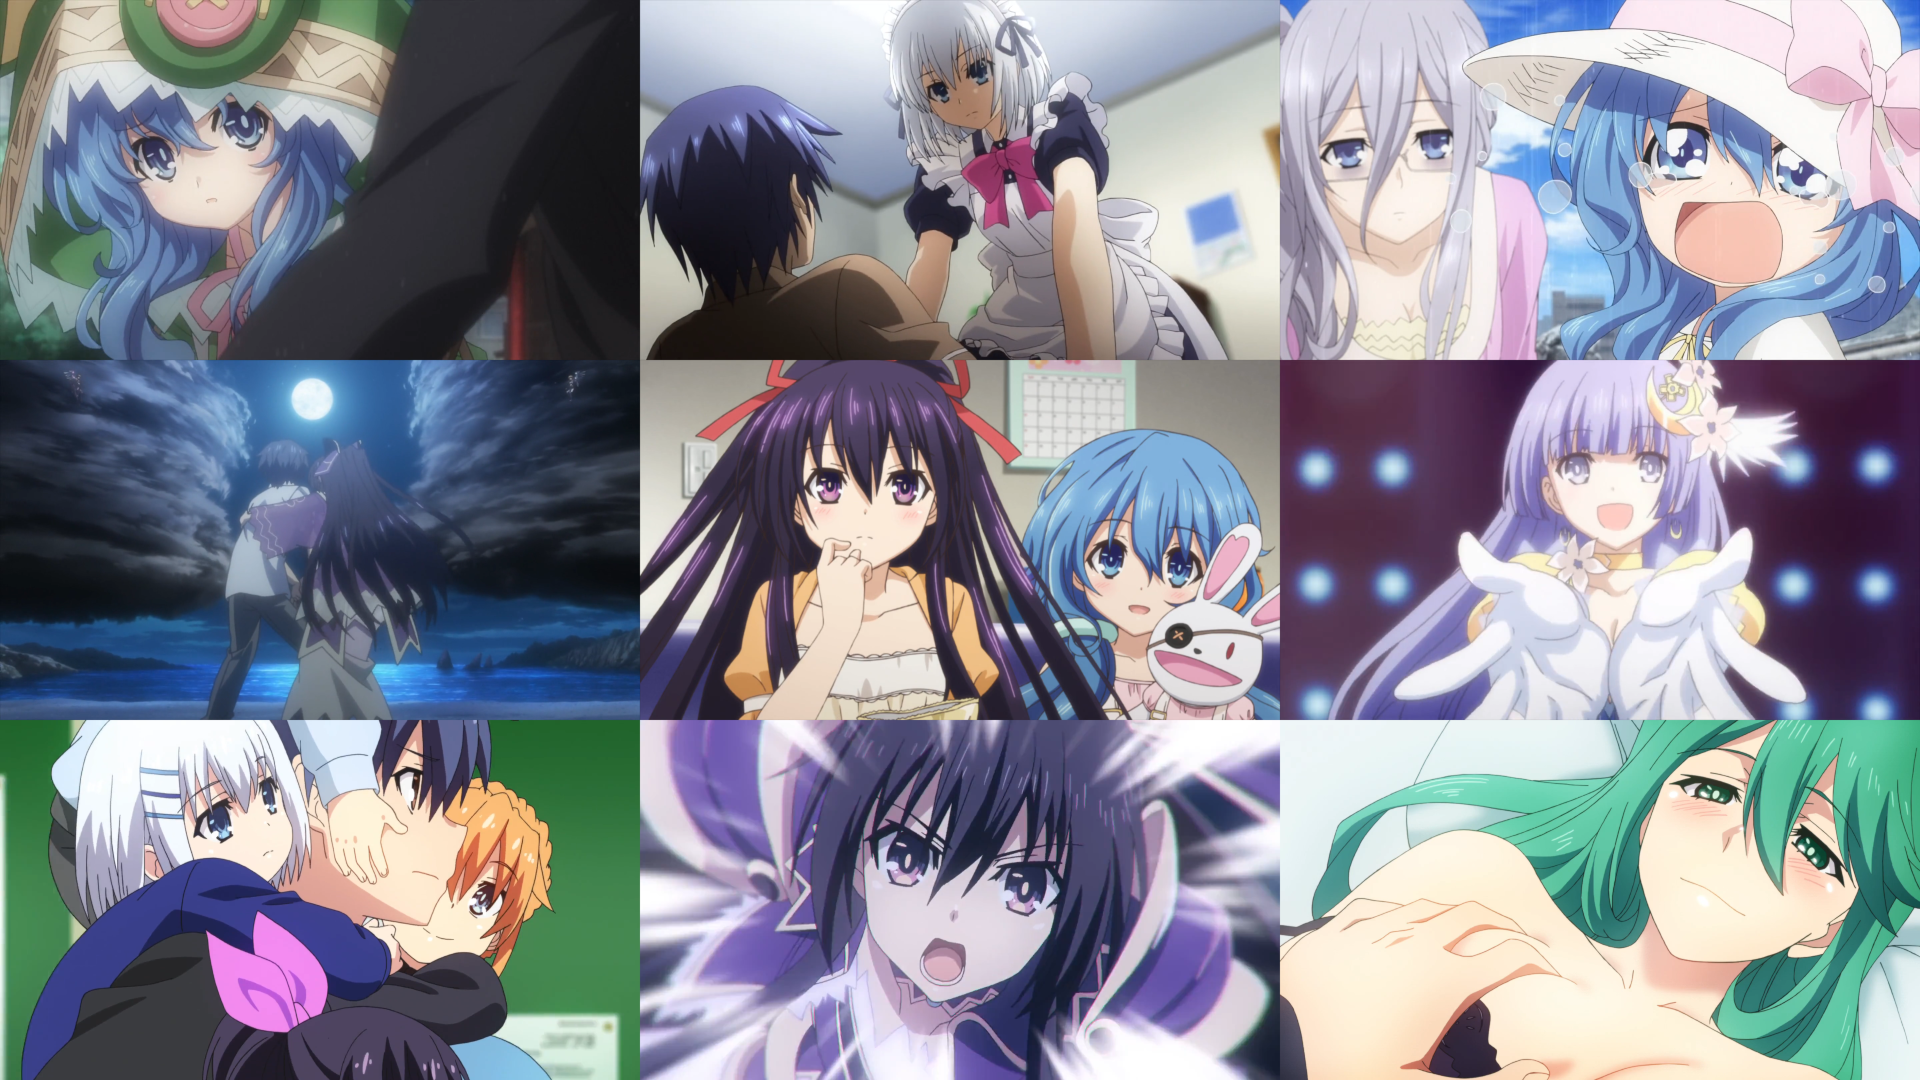 Date a Live Reveals Best Anime Scenes Competition Results - Anime Corner